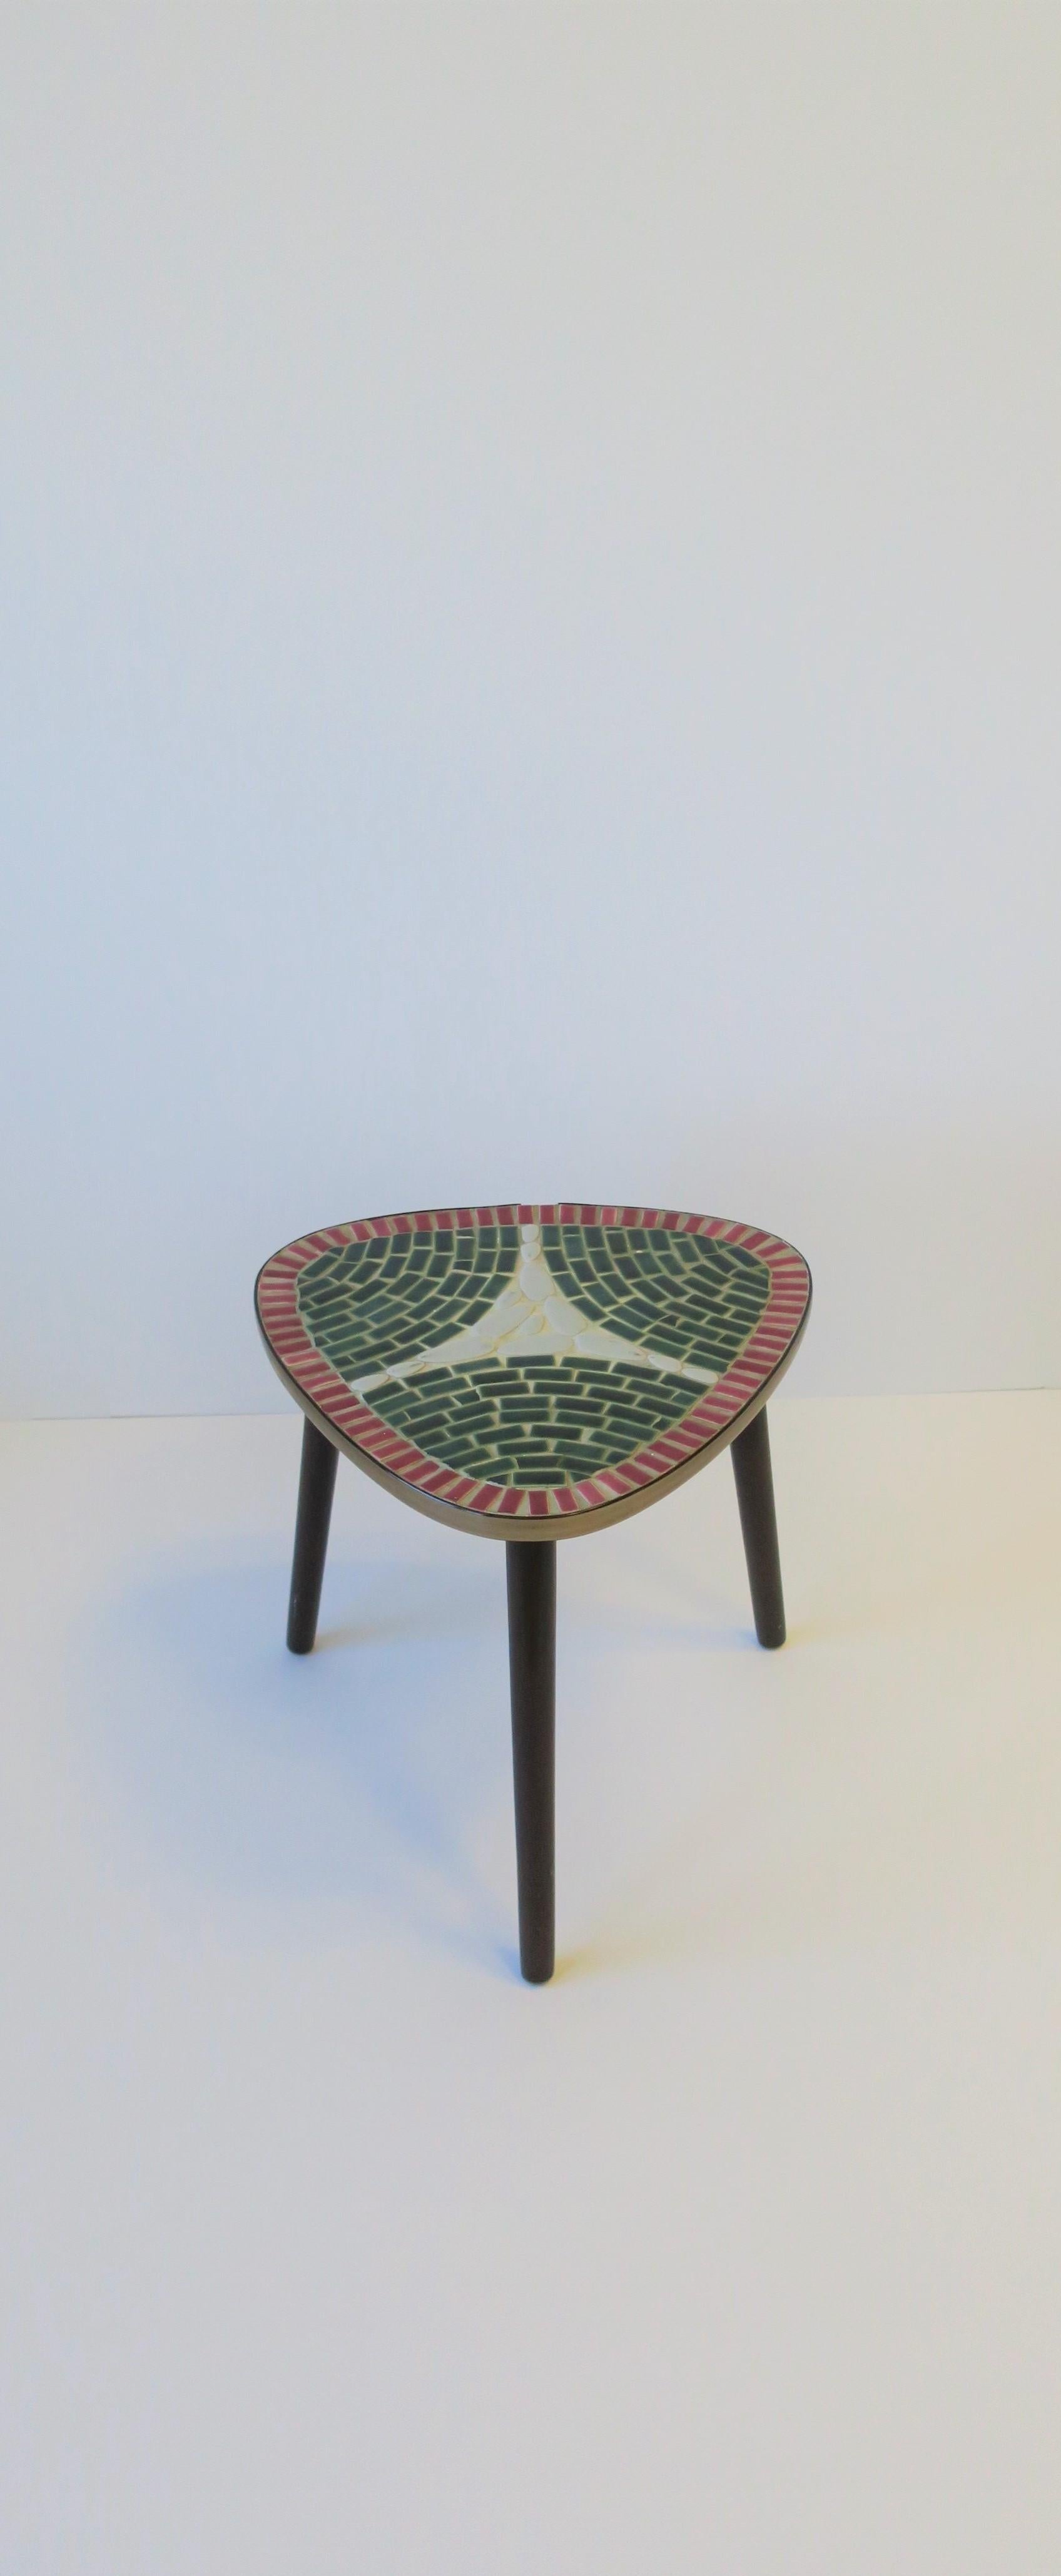 A very beautiful, small and low, Mid-Century Modern period tile mosaic side table with tripod wood base, circa mid-20th century, 1960s, Japan. Mosaic tile colors include: raspberry red, forest green, and a light grey. Table is great for drinks, as a